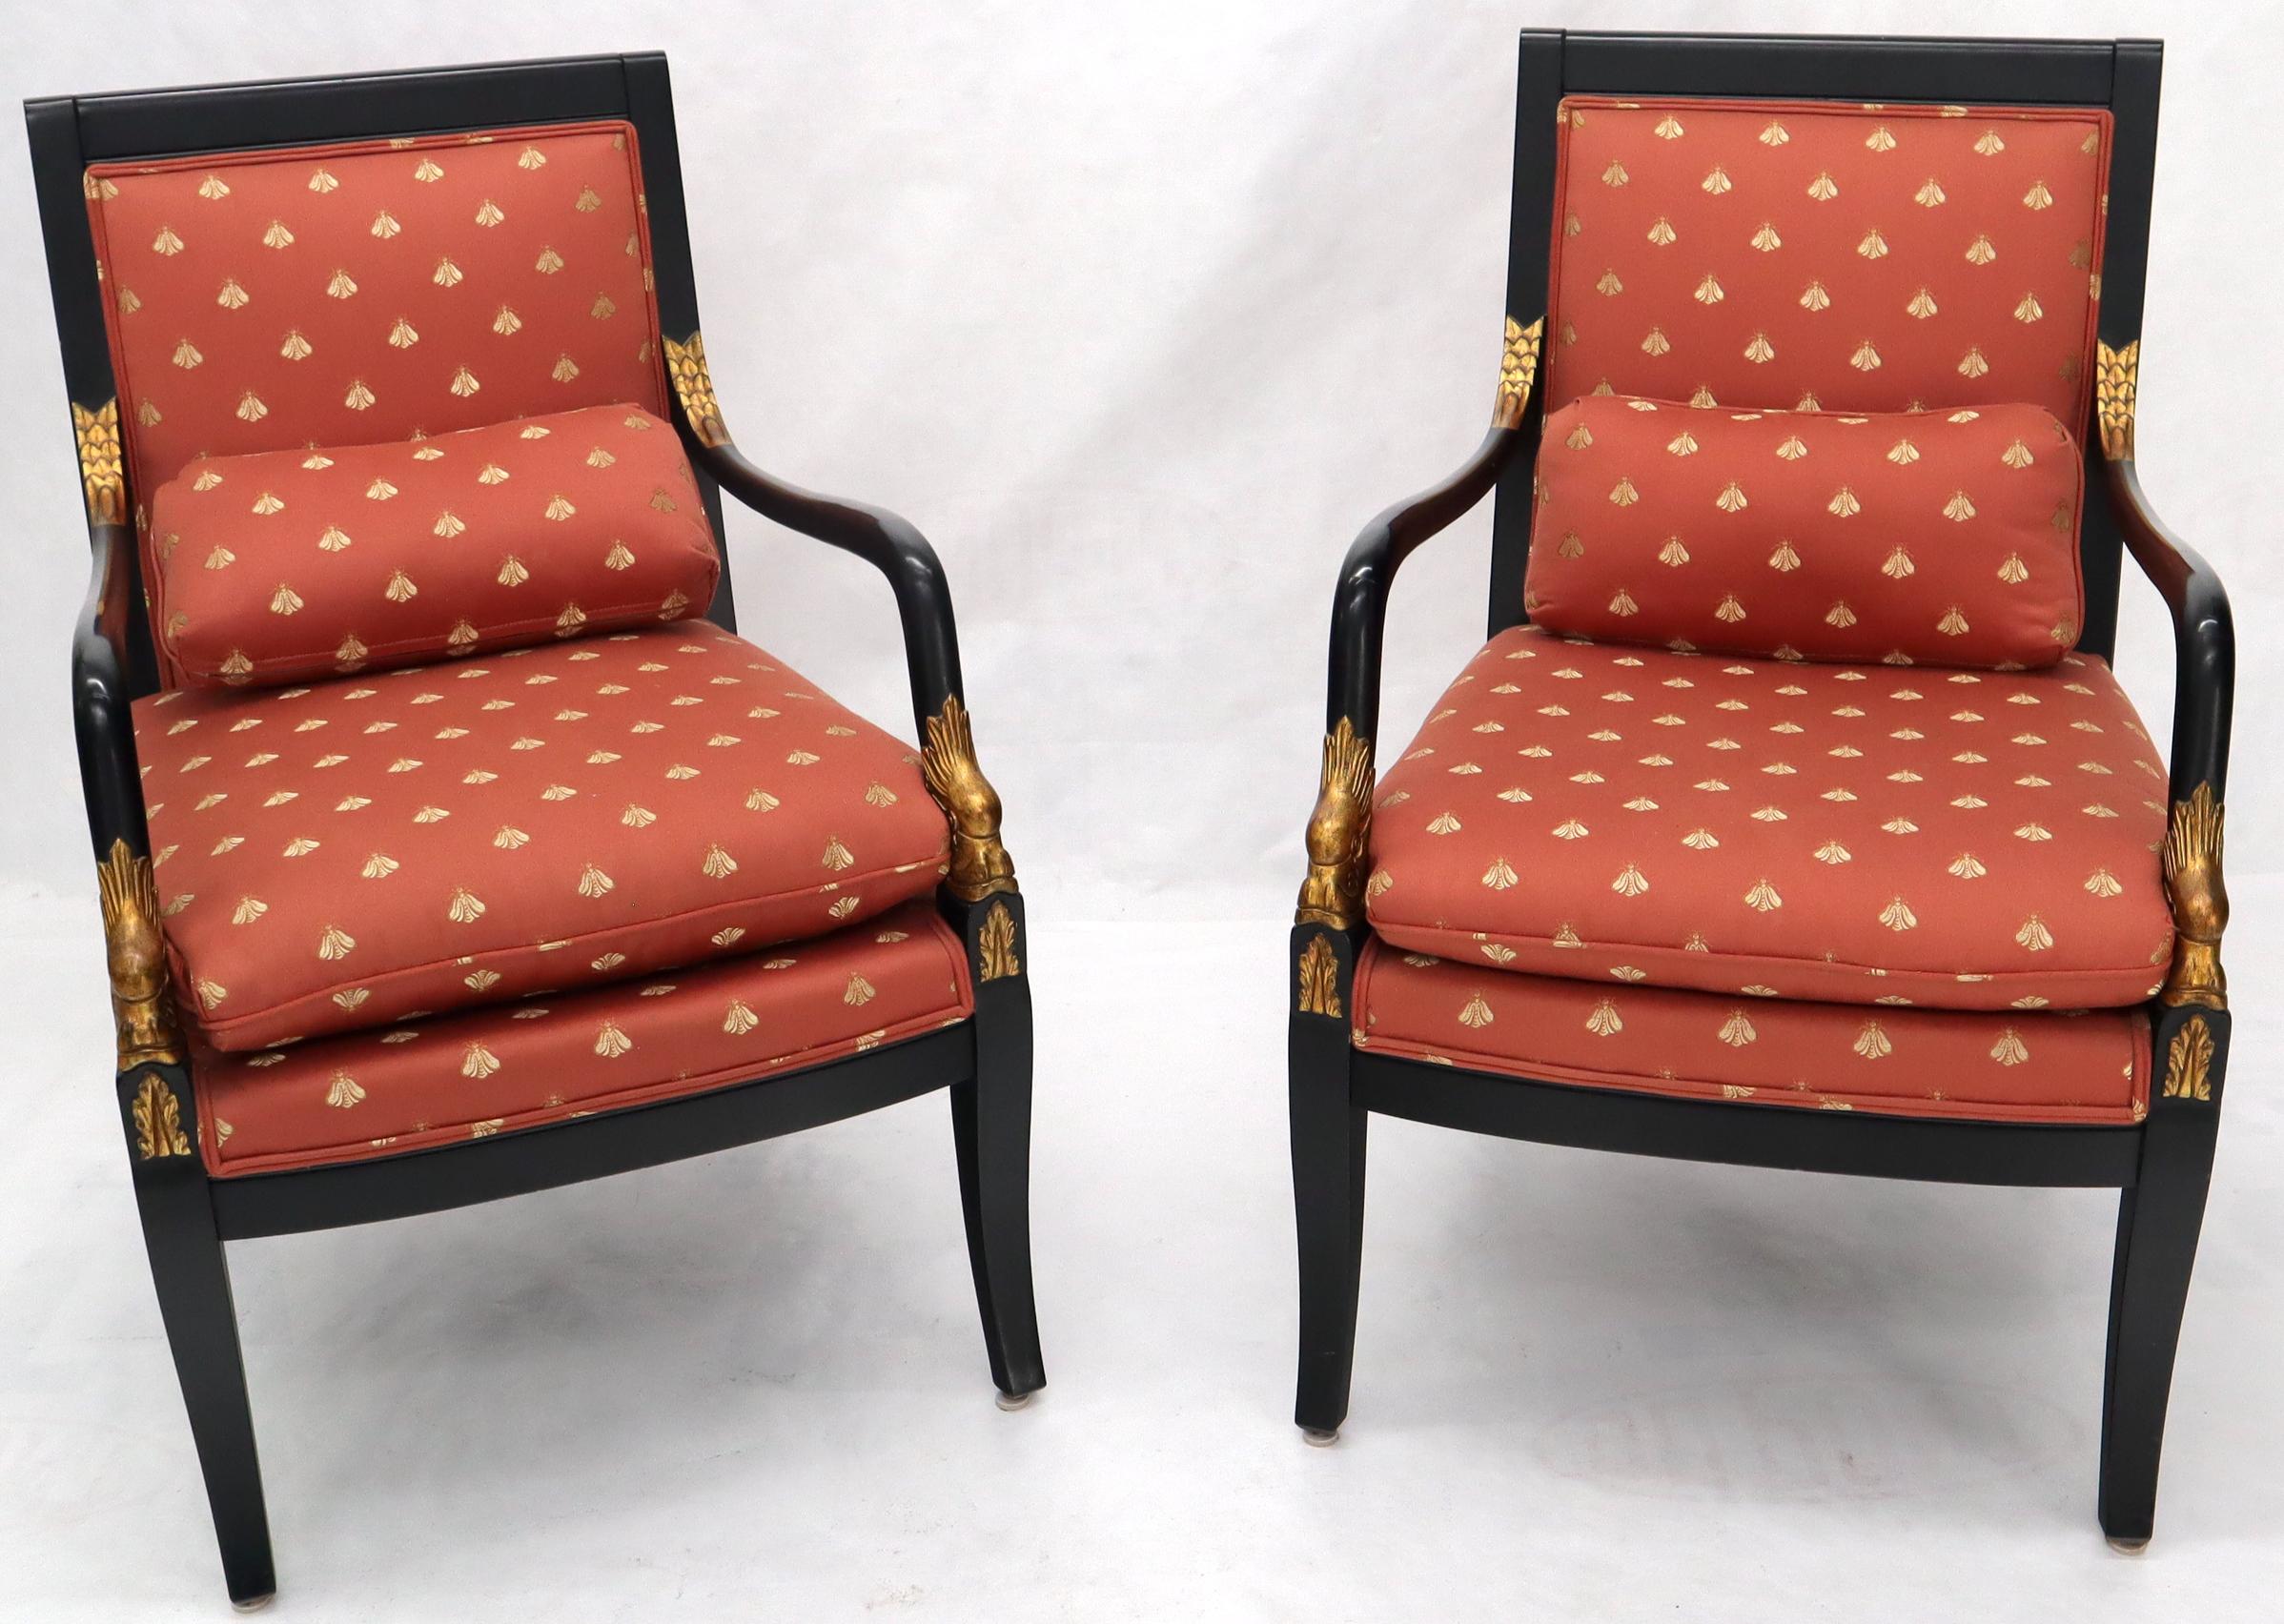 Pair of neoclassical decorator chairs silk like fabric upholstery.